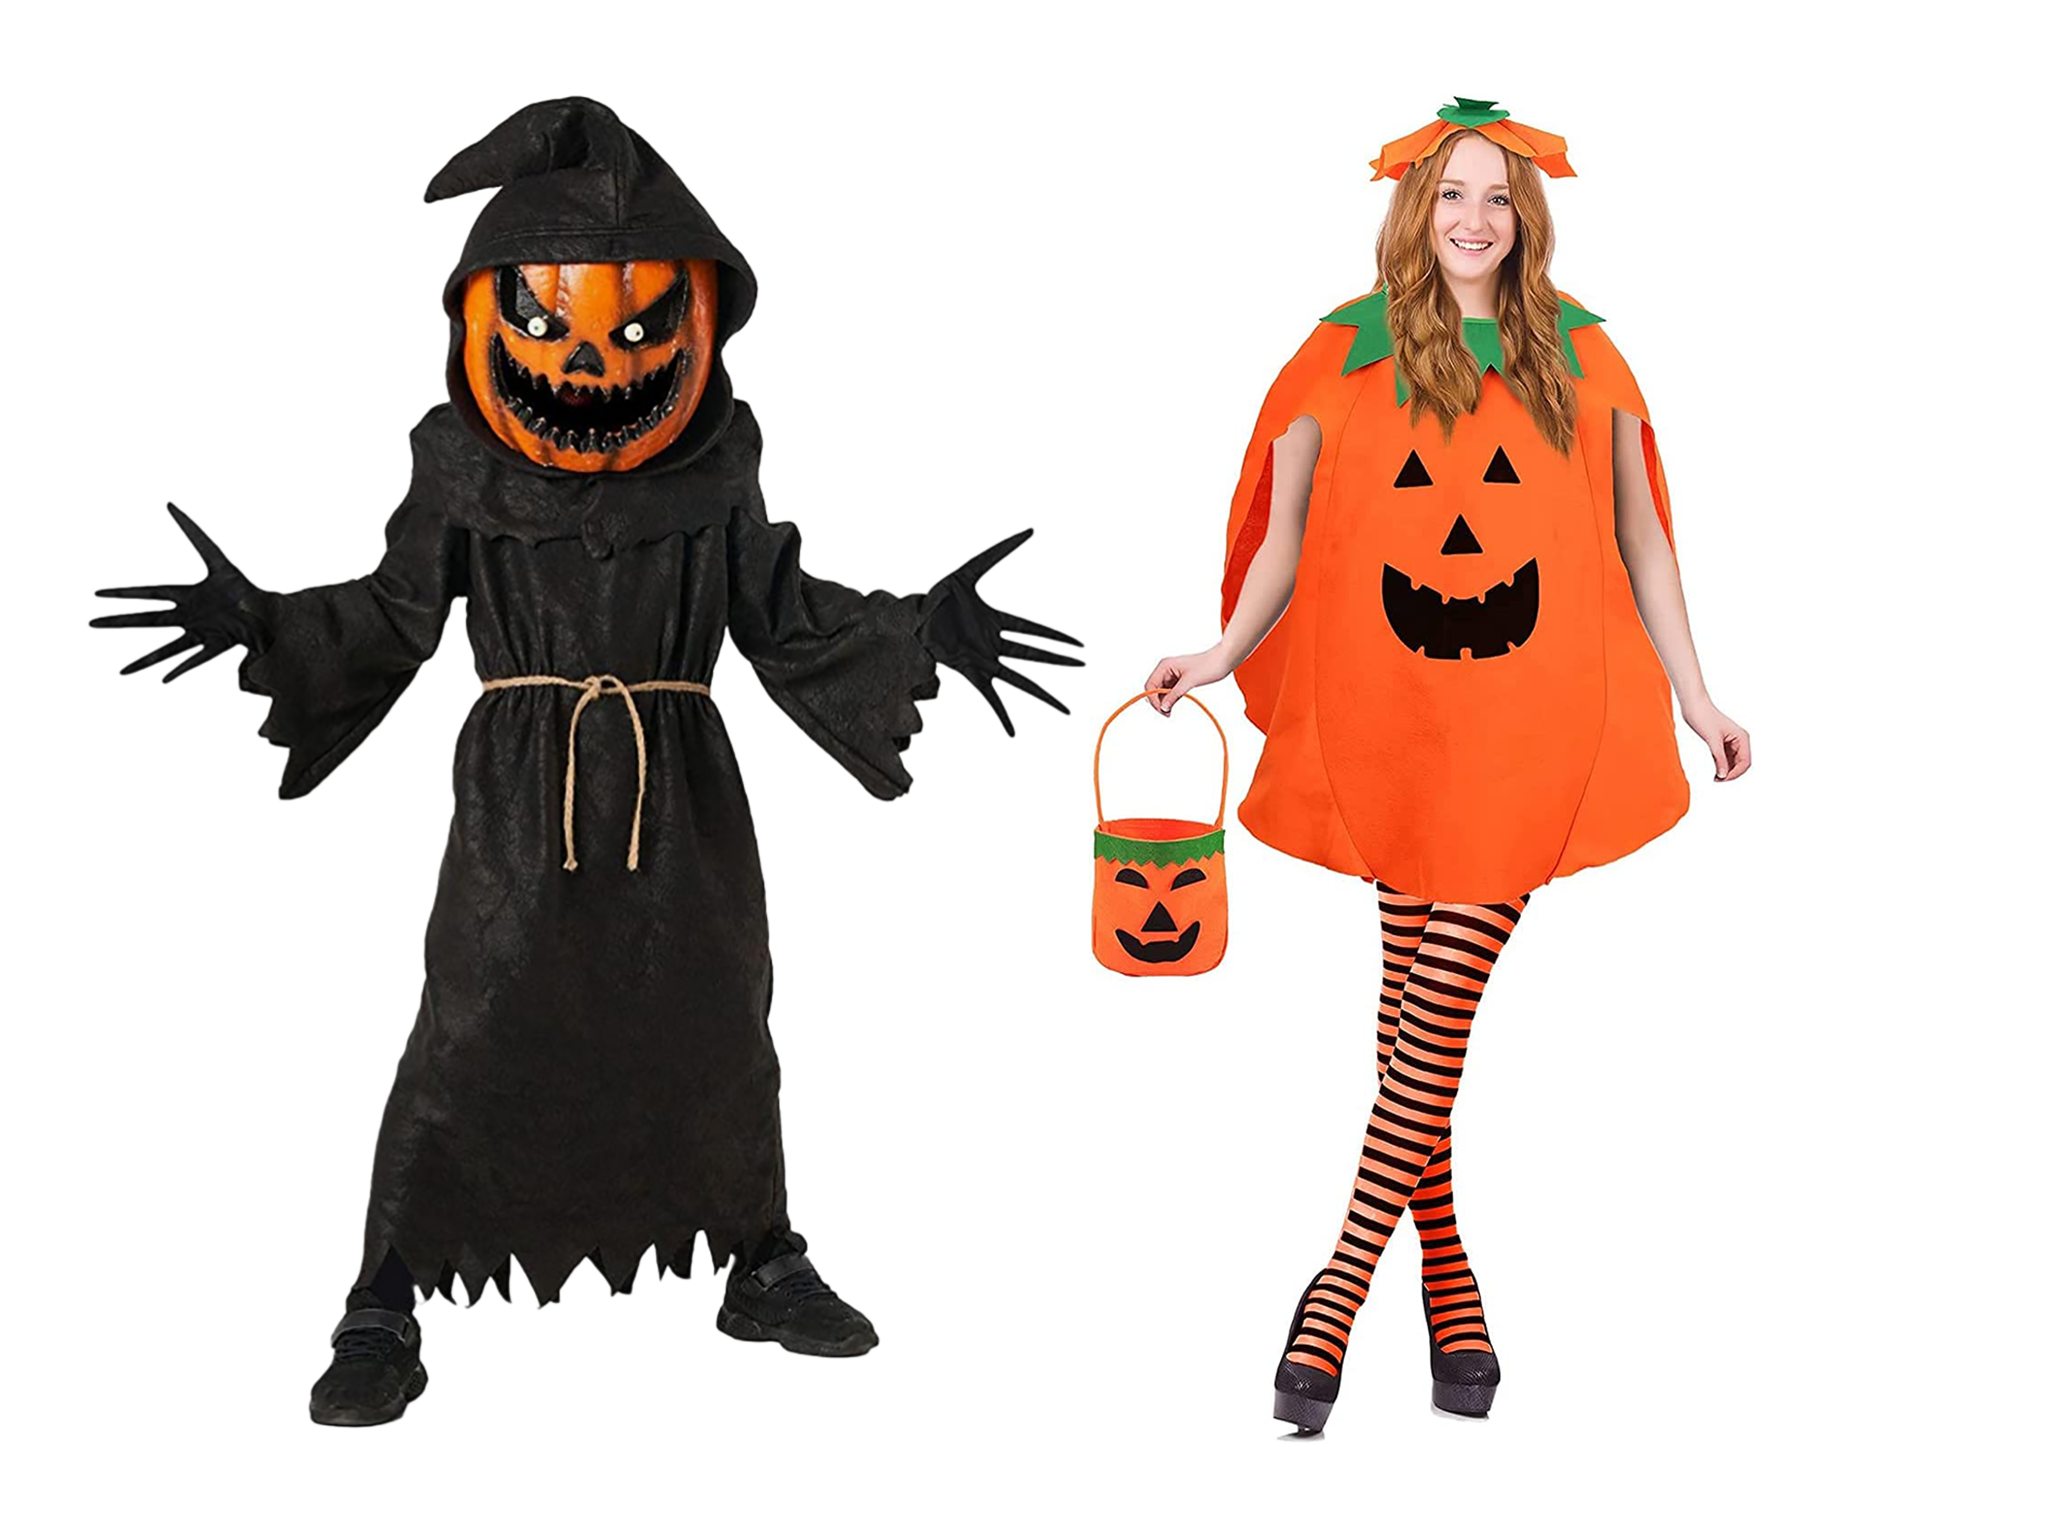 Cheap Halloween costumes for kids and adults Aldi, Amazon and more The Independent